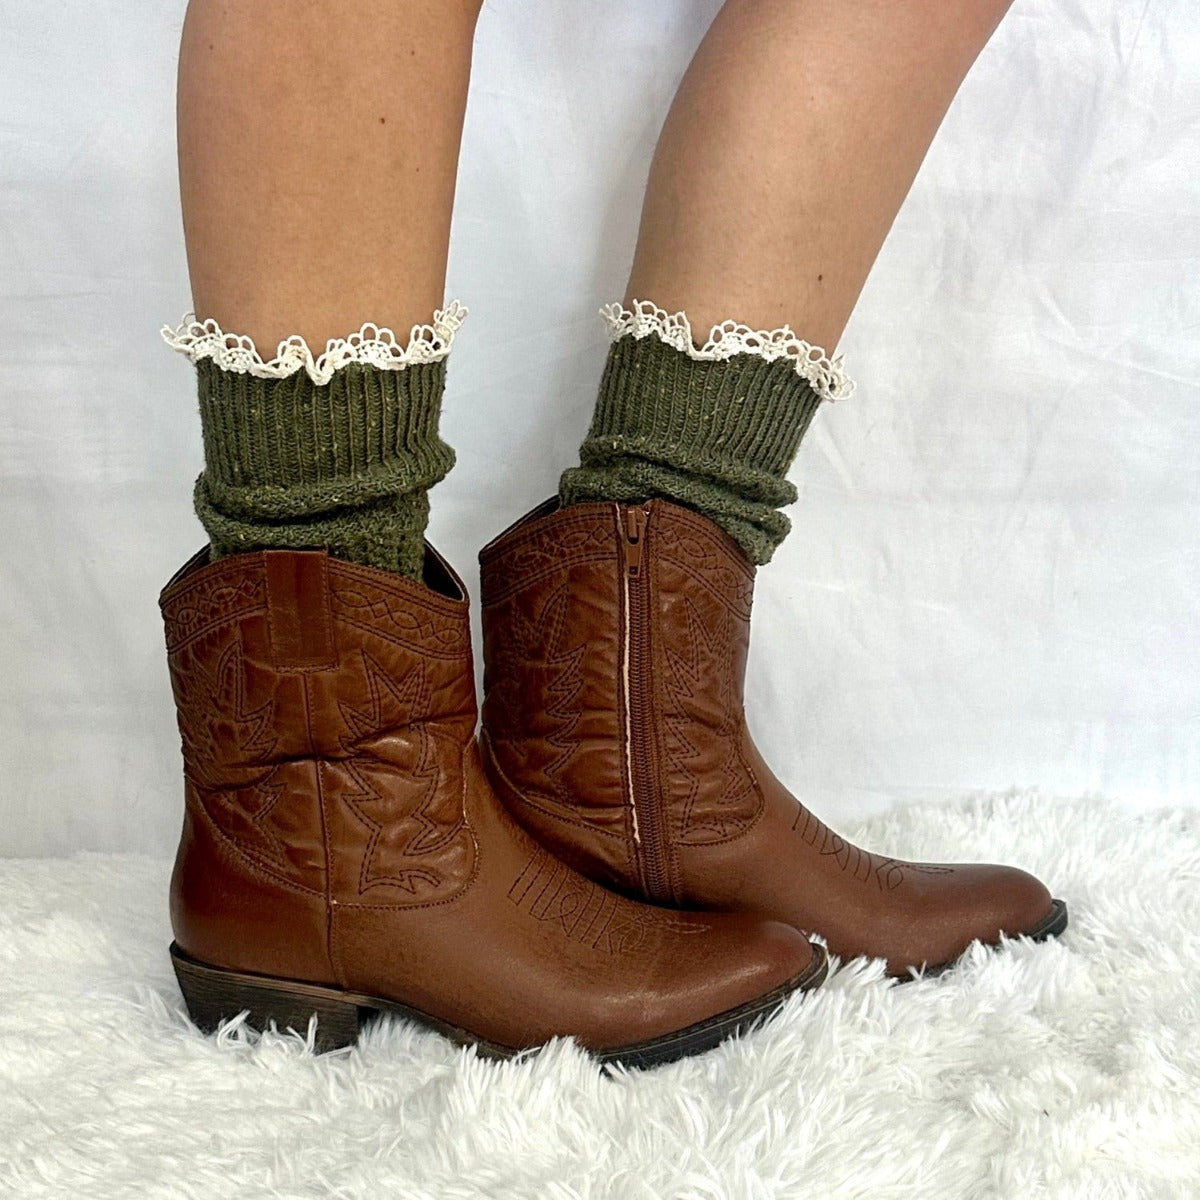 cowgirl socks, best quality women's lace boot socks near me, lace trim short boot socks women's, amazon.